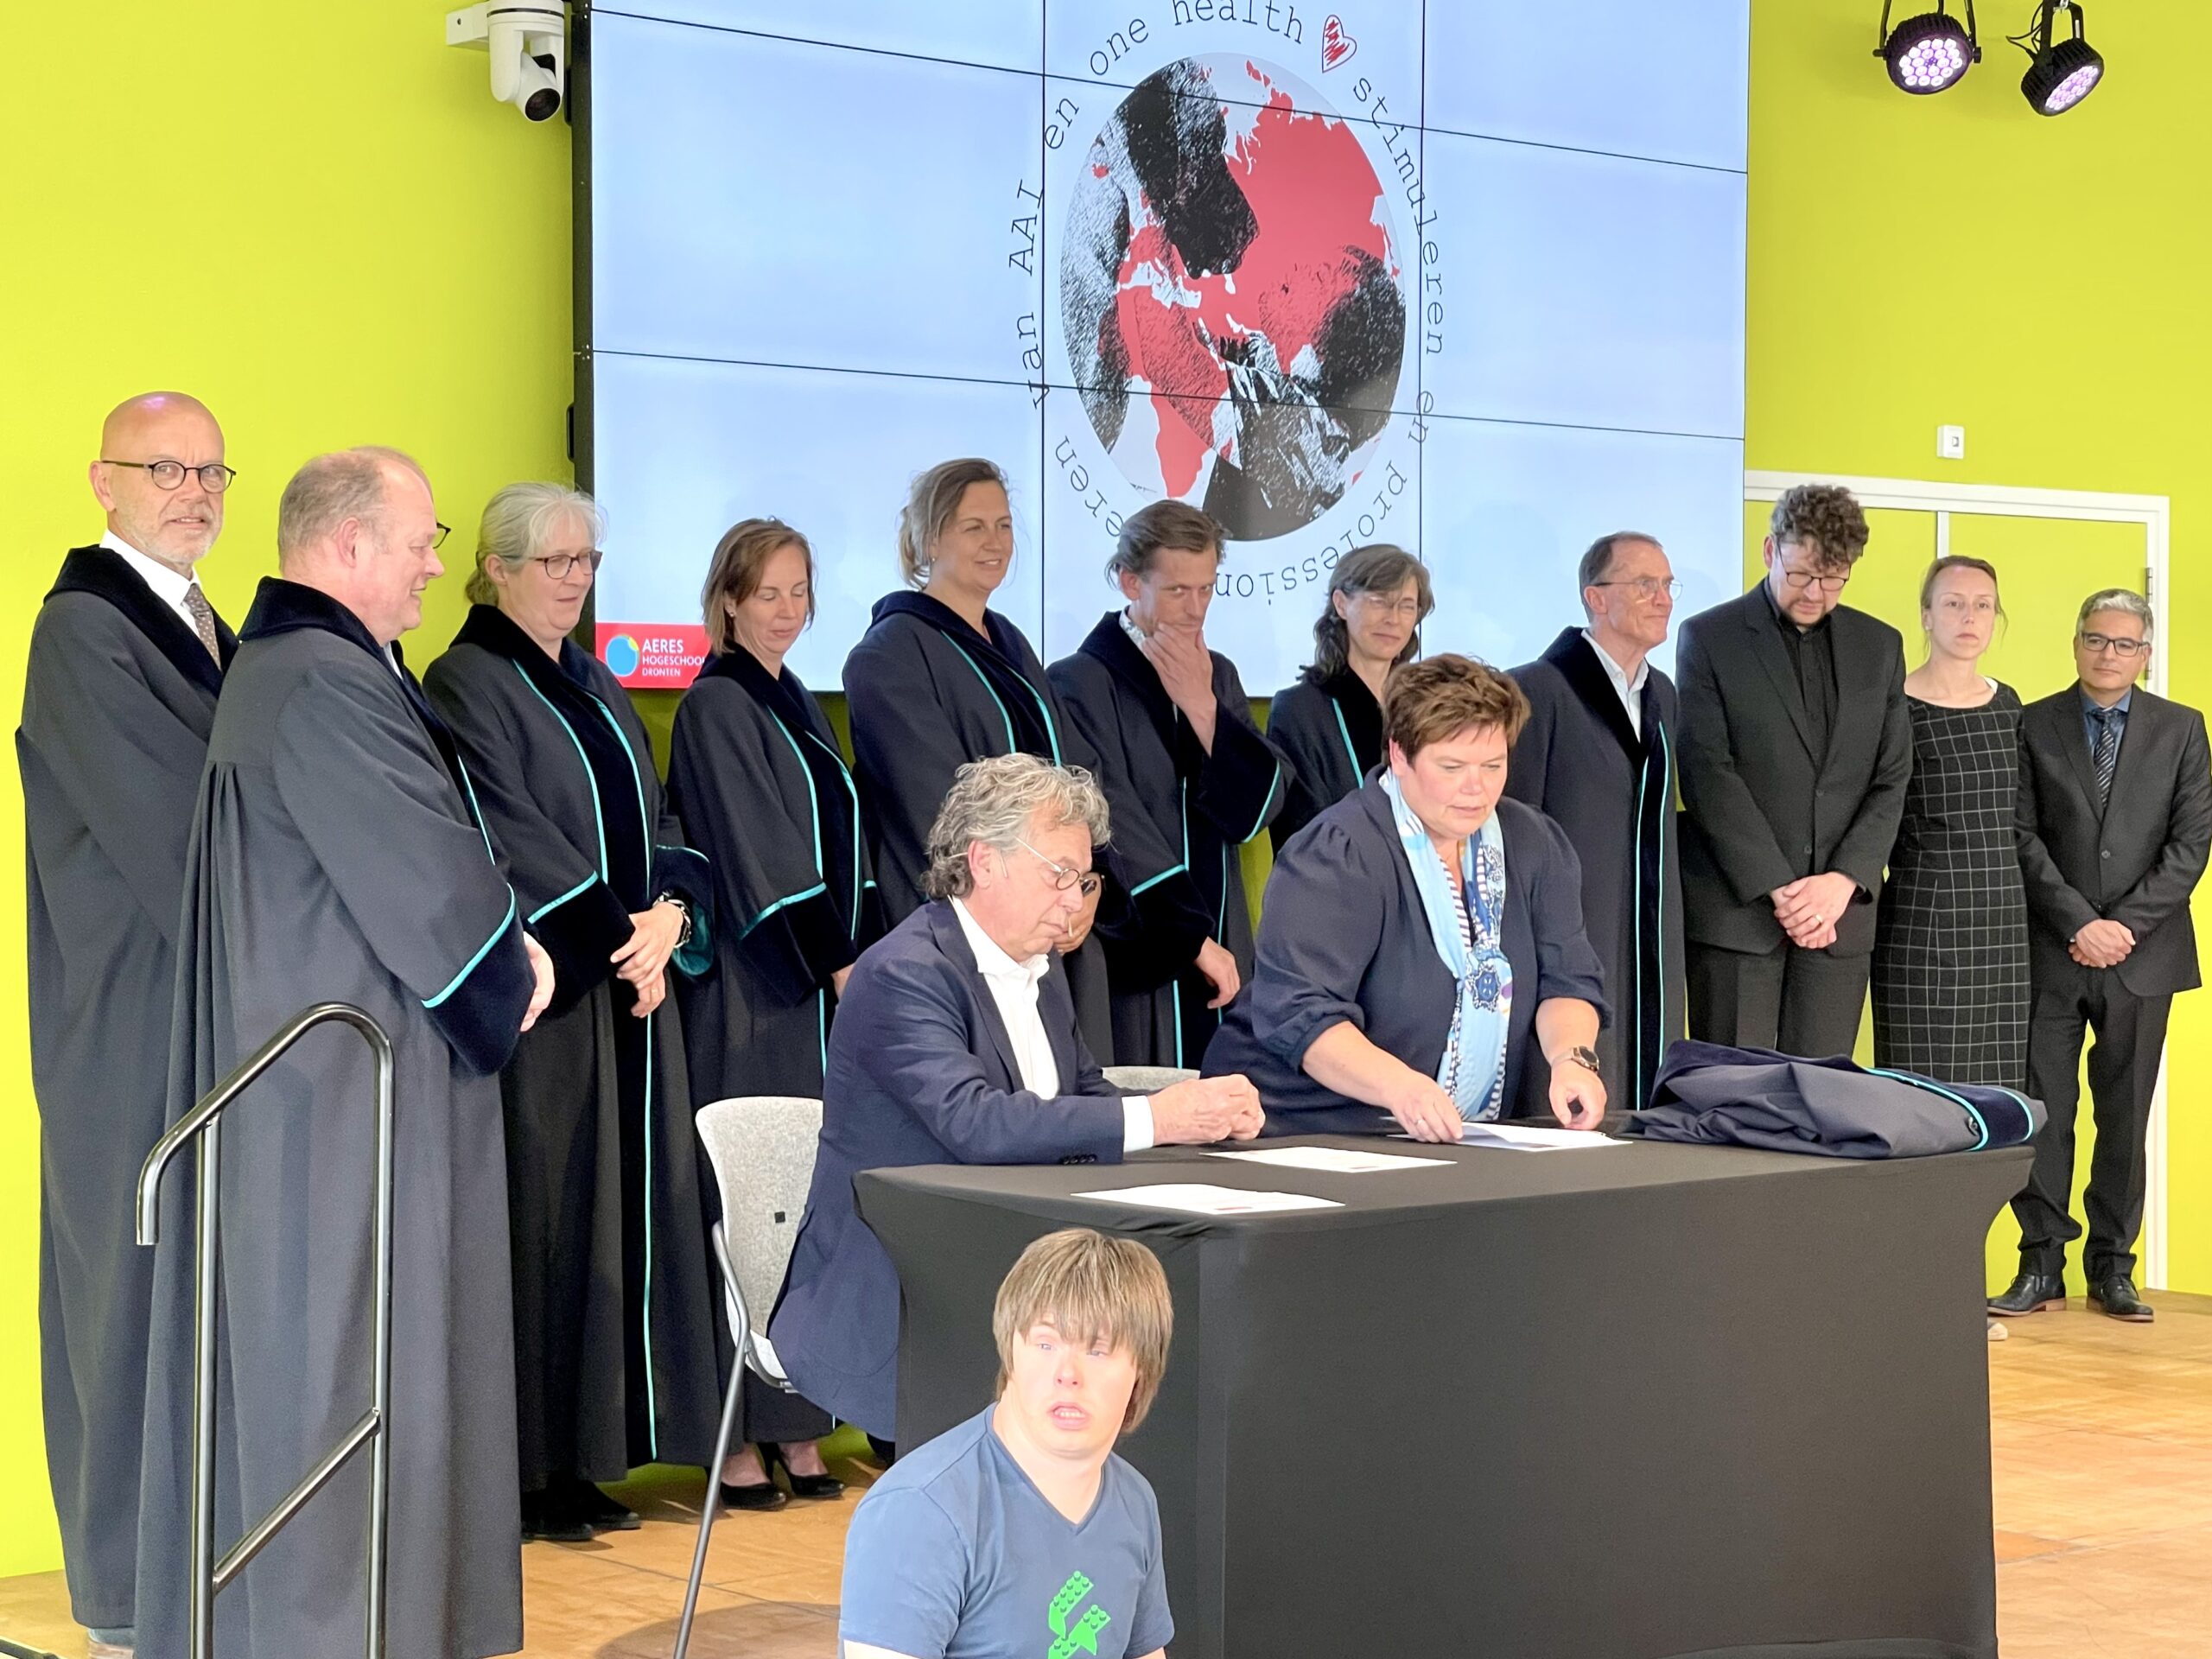 Dr. Richard Griffioen sits at a table and signs a paper. In the background we see lined up academia, dressed in black robes.